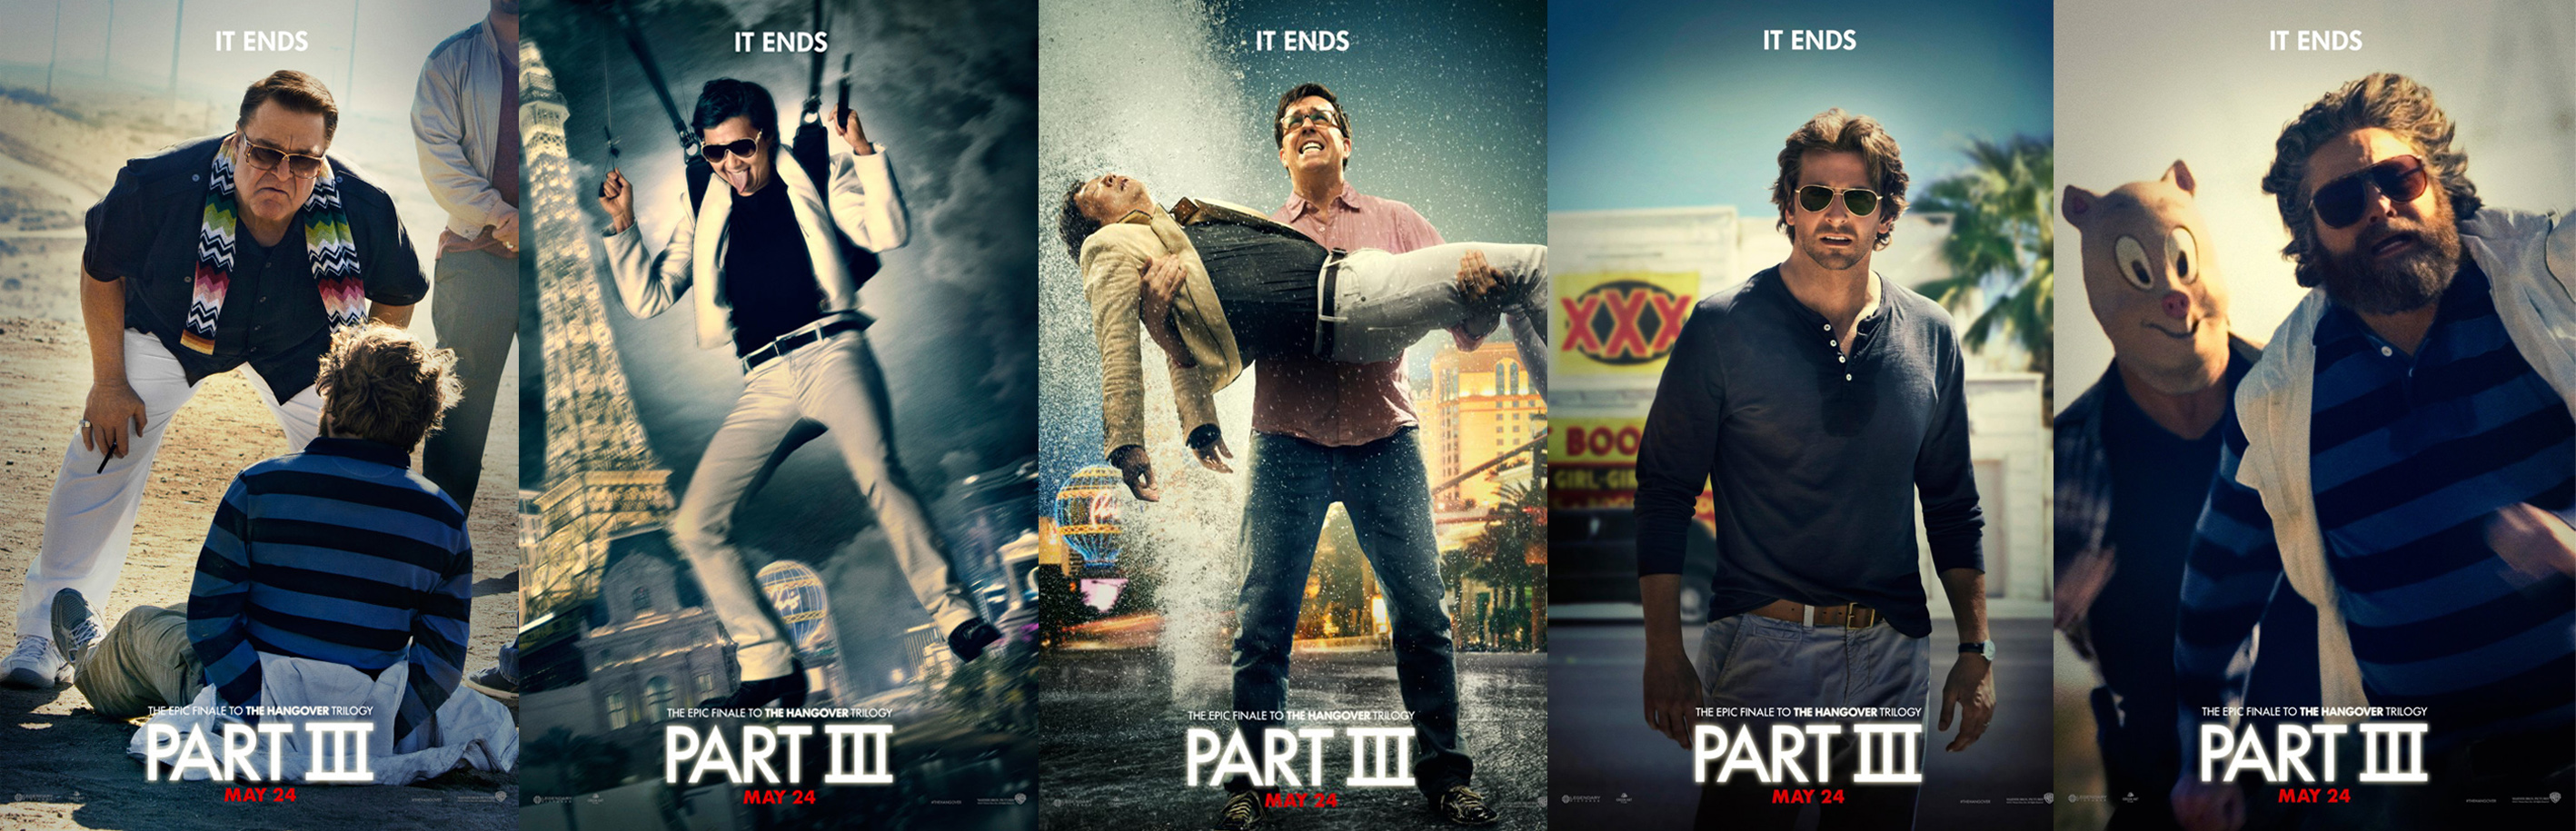 Hangover 3 posters copy